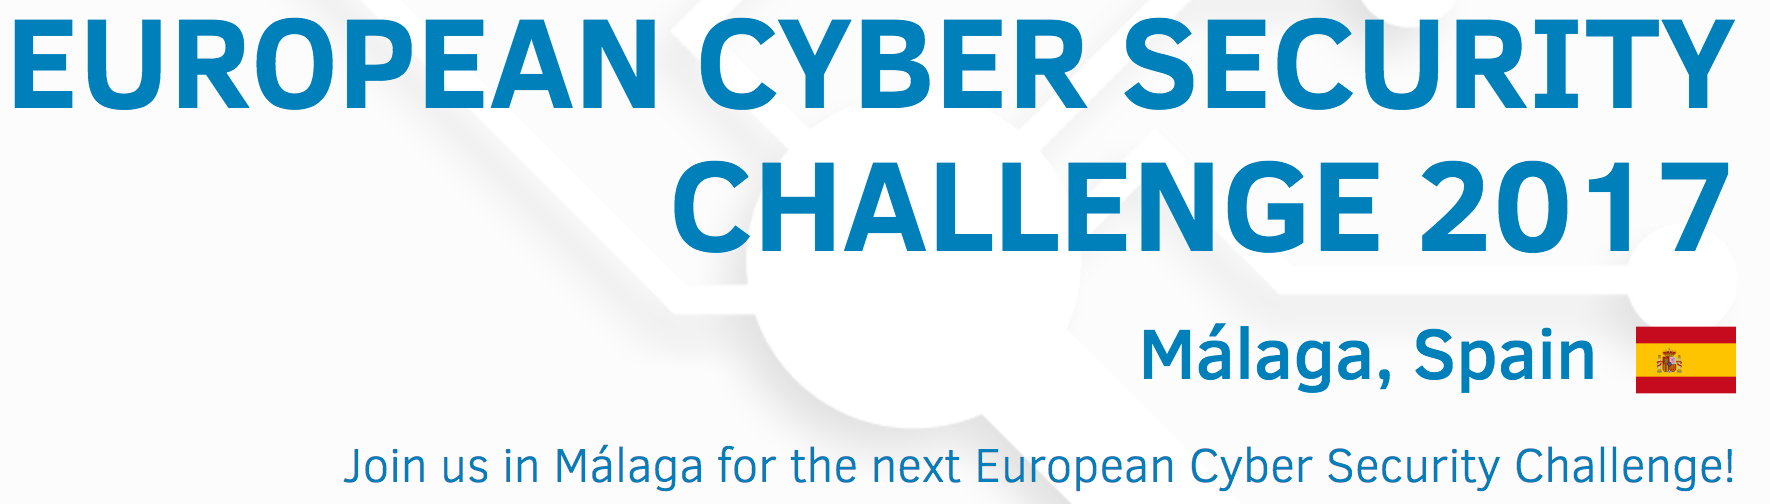 European Cyber Security Challenges 2017